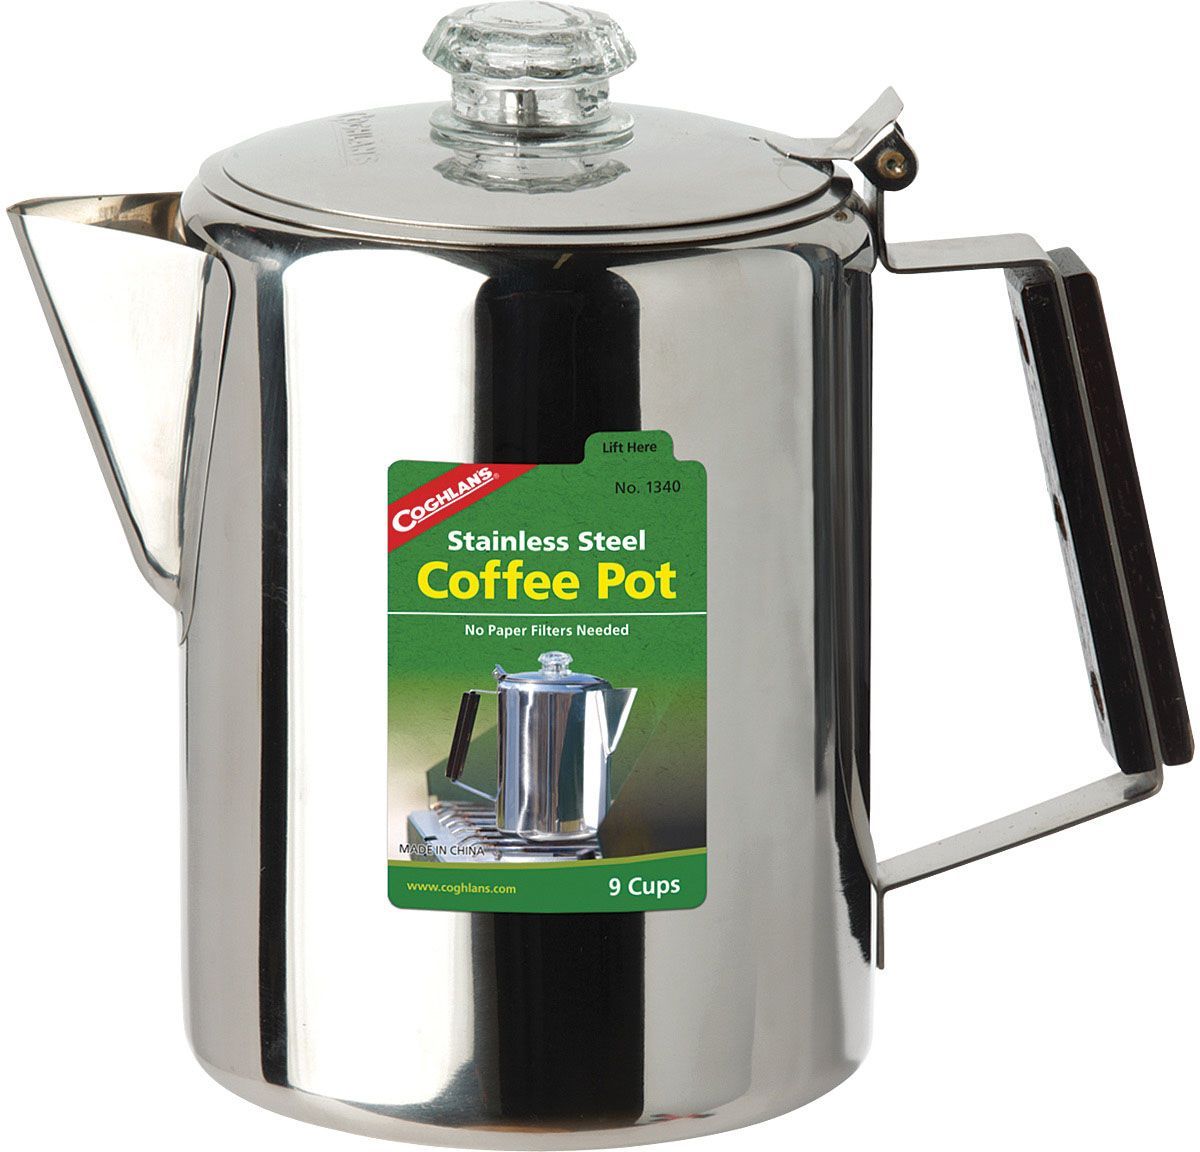 COGHLANS STAINLESS STEEL COFFEE POTS